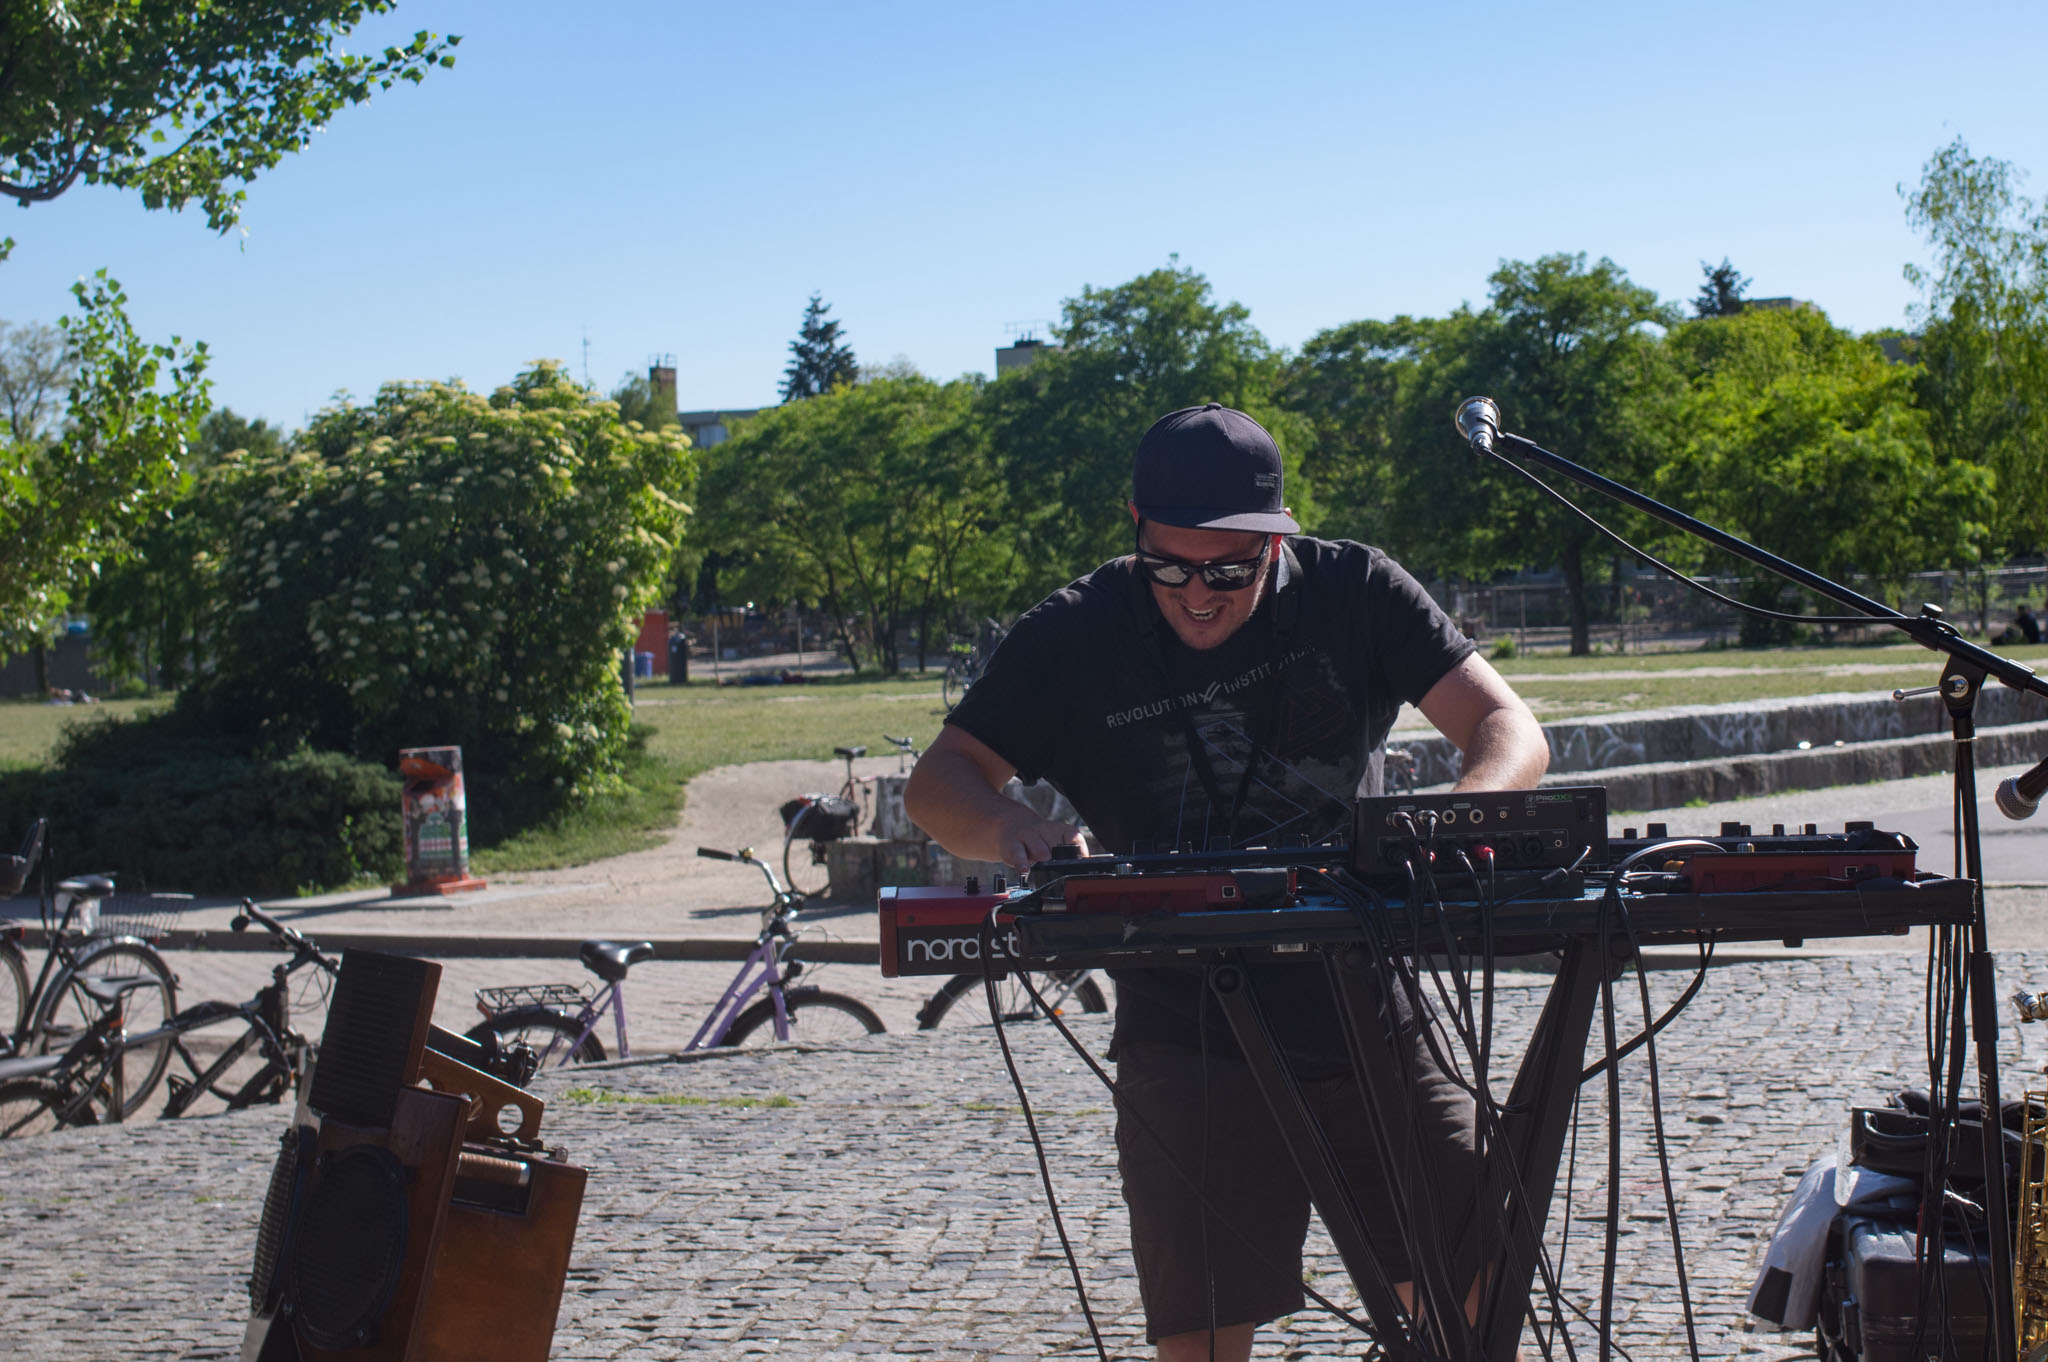 Andy V from Australie playning the keyboard in MAuerpark, Berlin